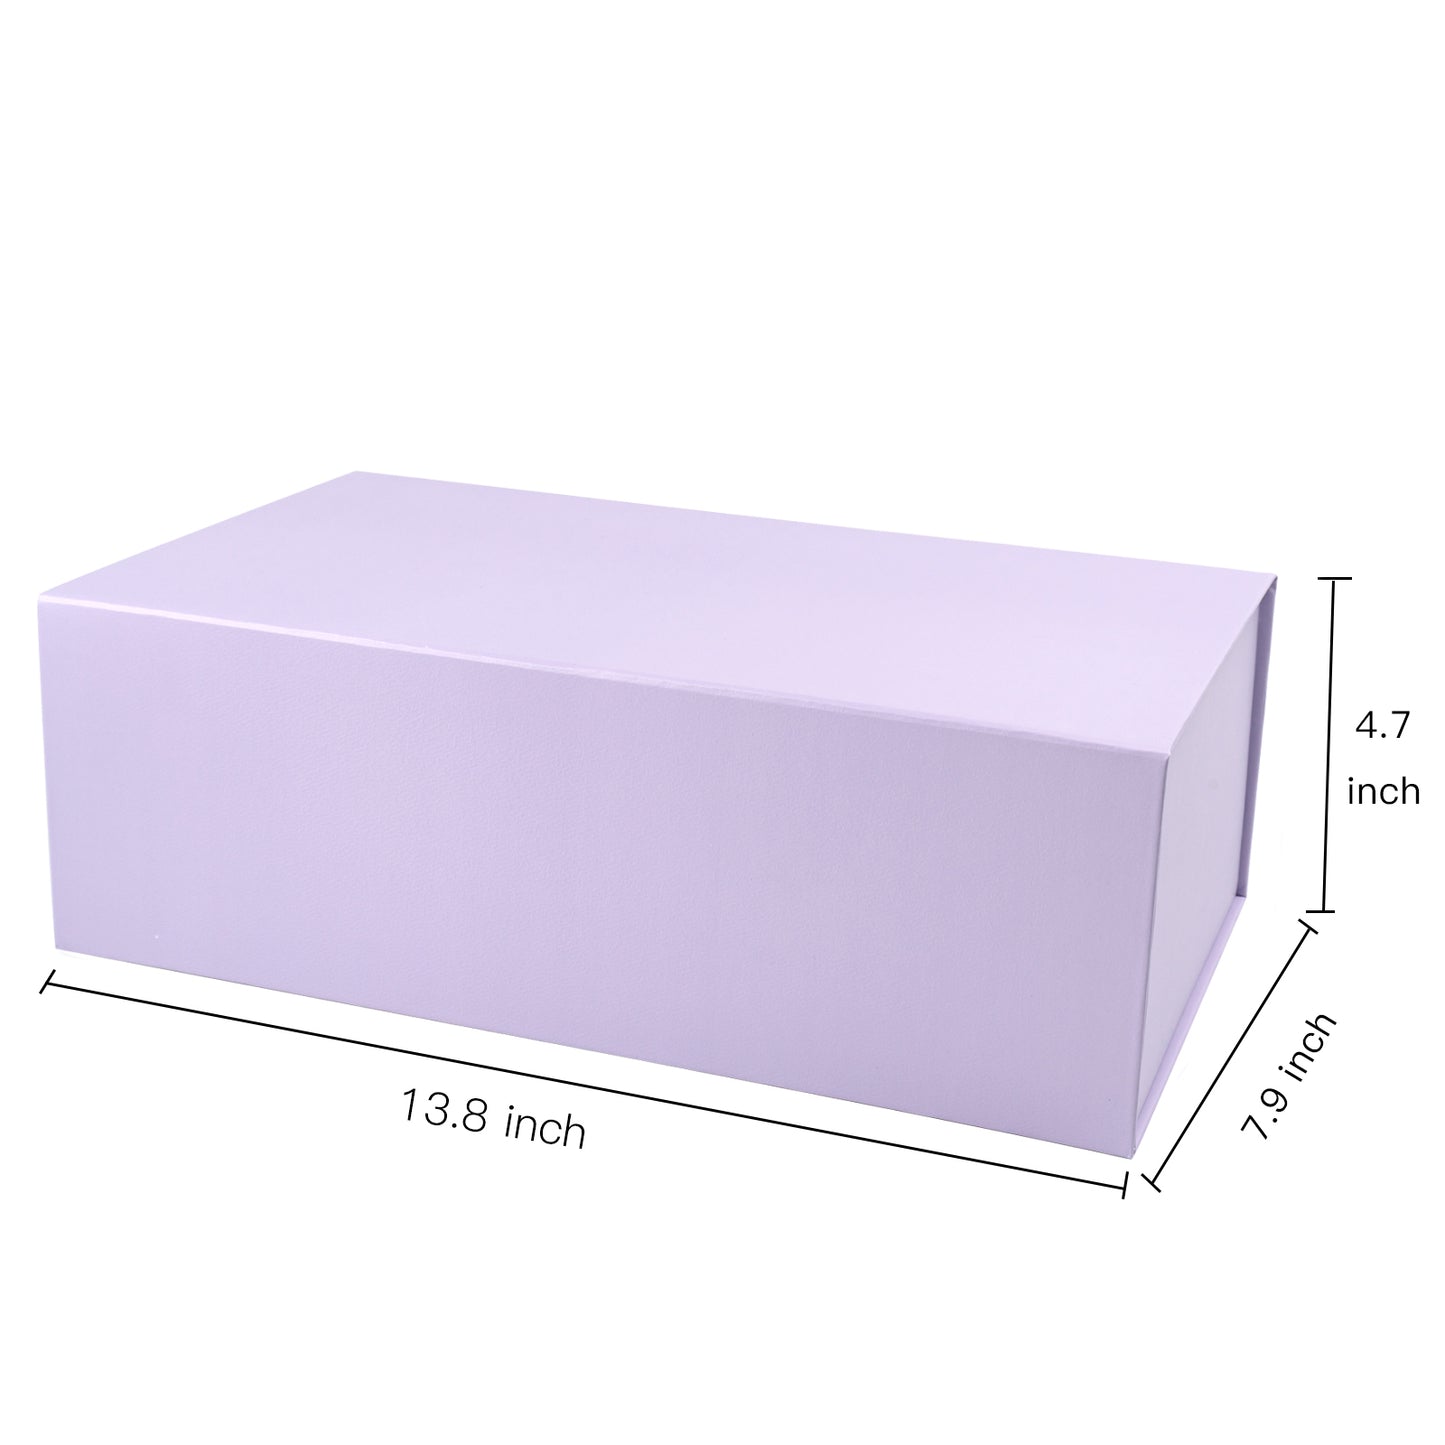 WRAPLA 35X23X10CM Purple Gift Box- Collapsible Gift Box with Magnetic Closure and Tissue Paper, Perfect for Birthday, Party, Holiday, Wedding, Graduation